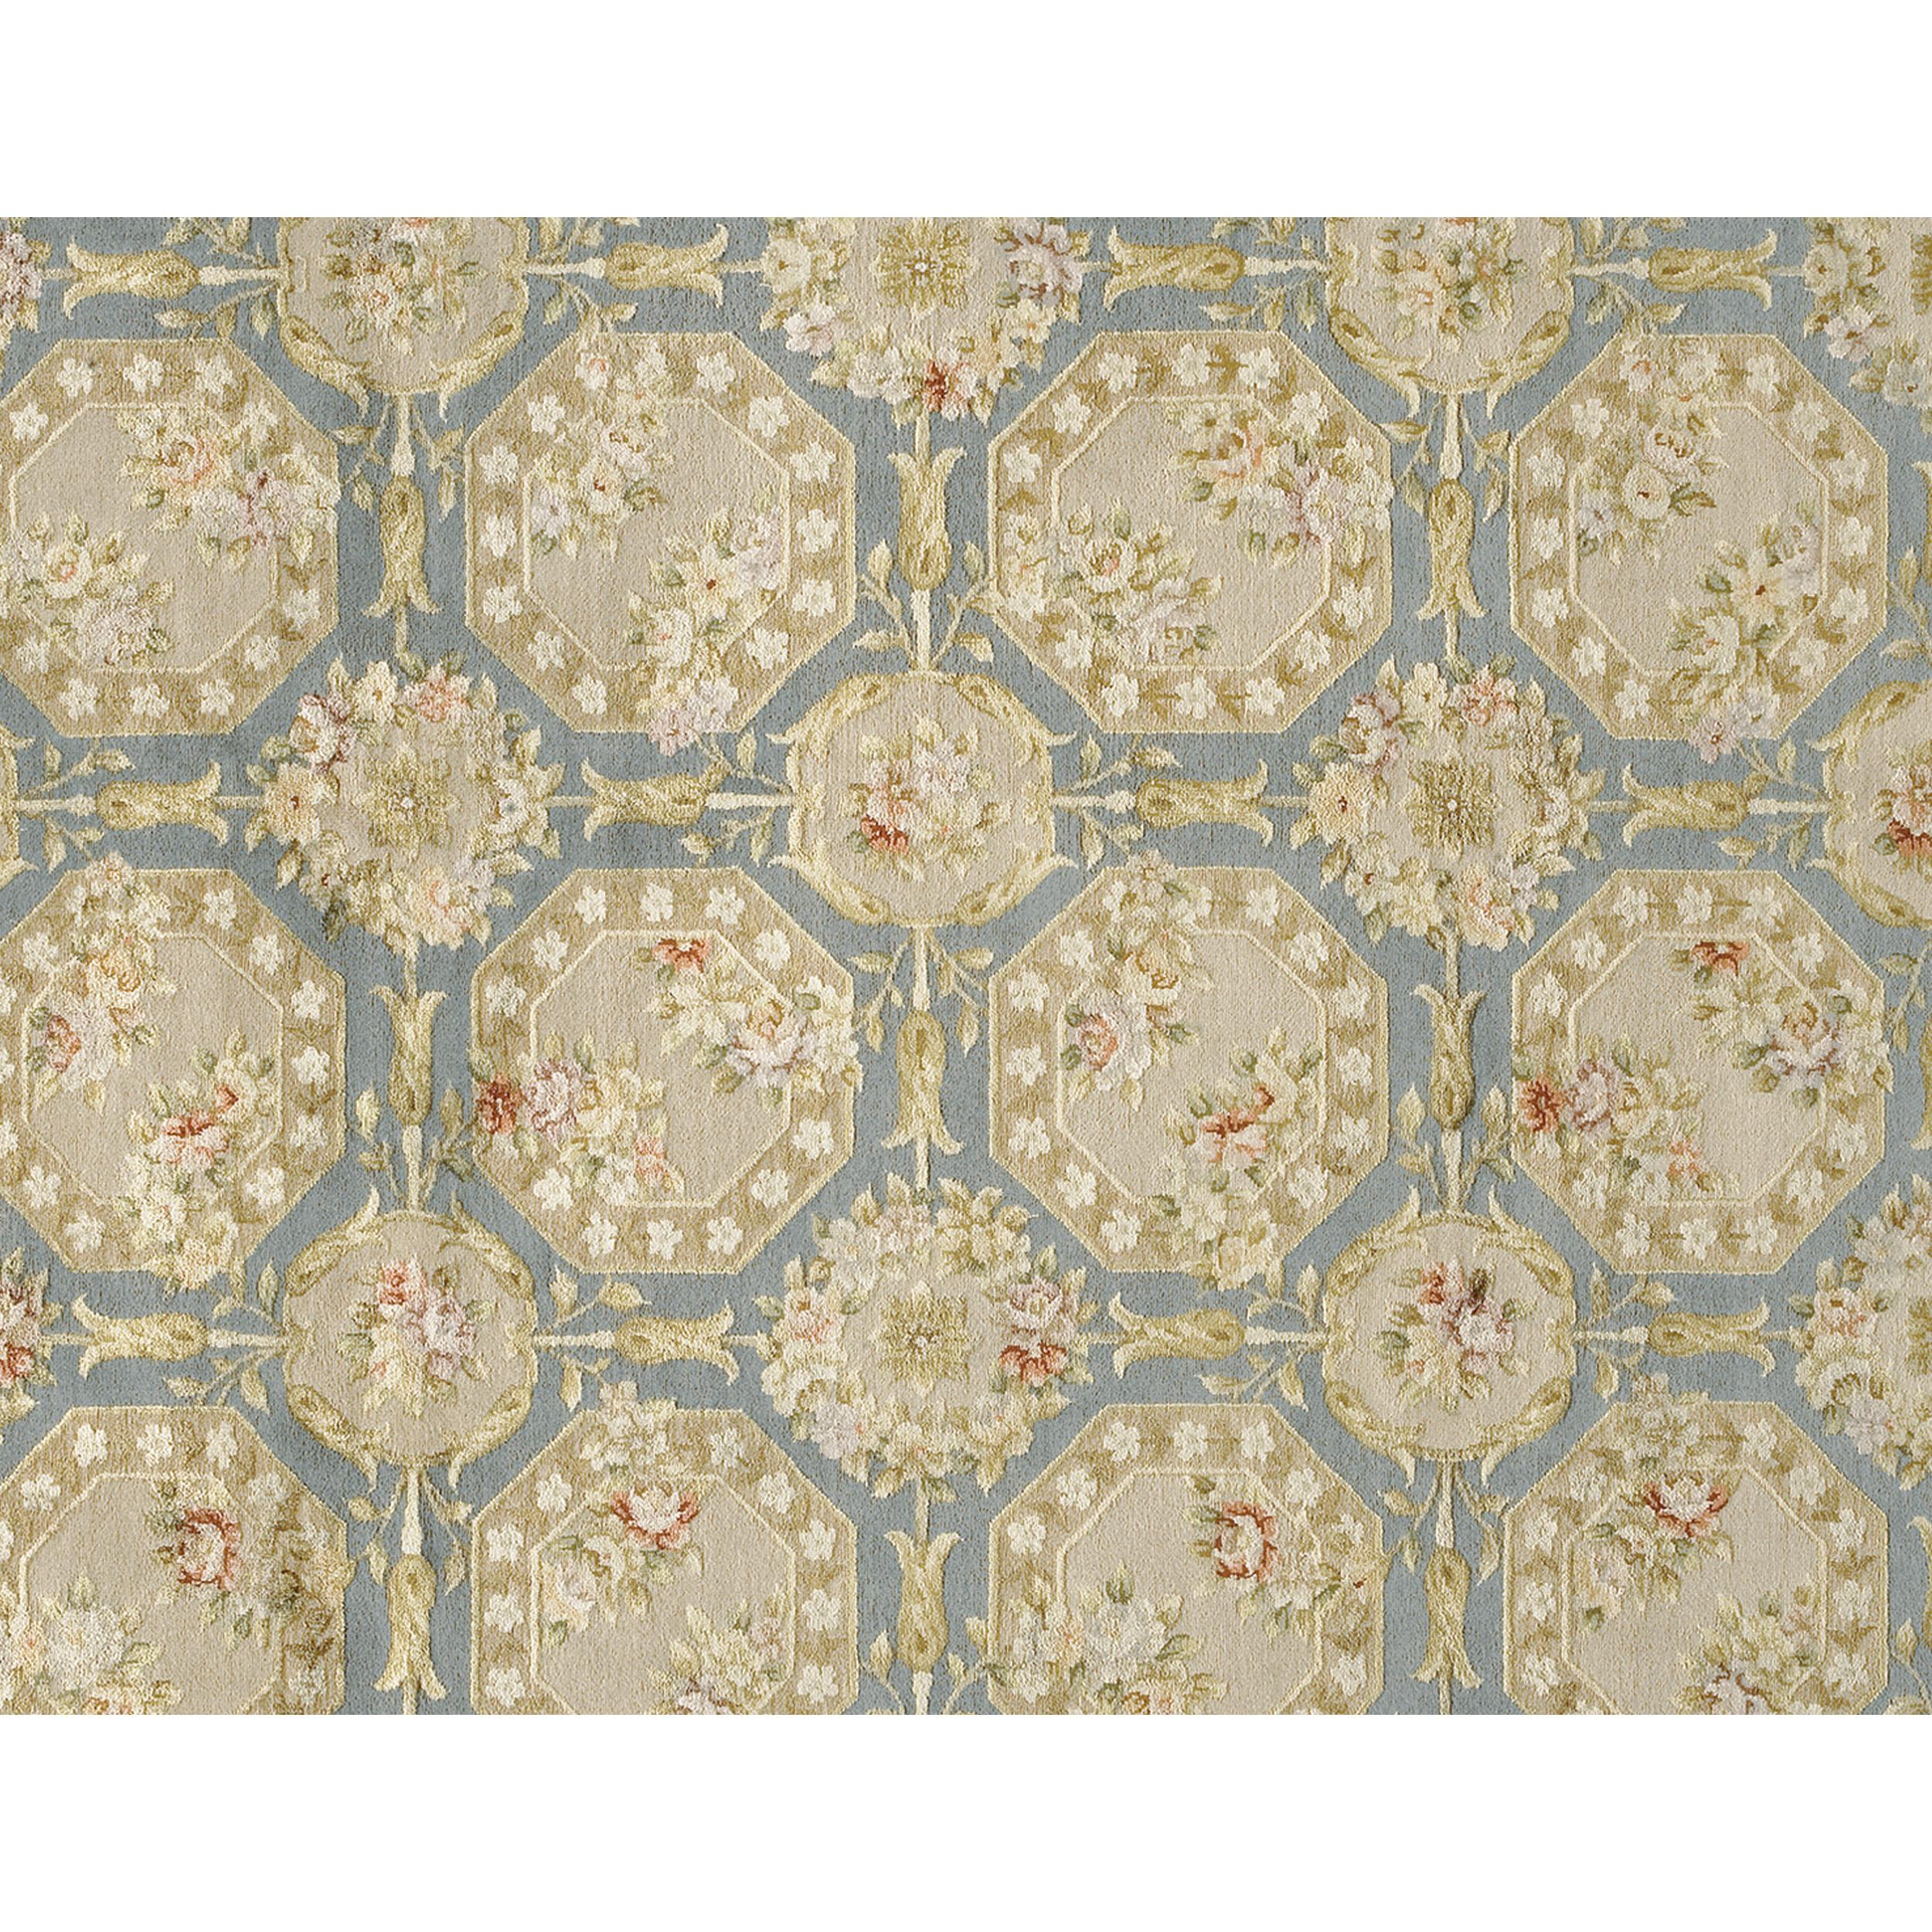 Aubusson Luxury European Hand-Knotted Fairfax Sterling & Cream 12x15 Rug For Sale